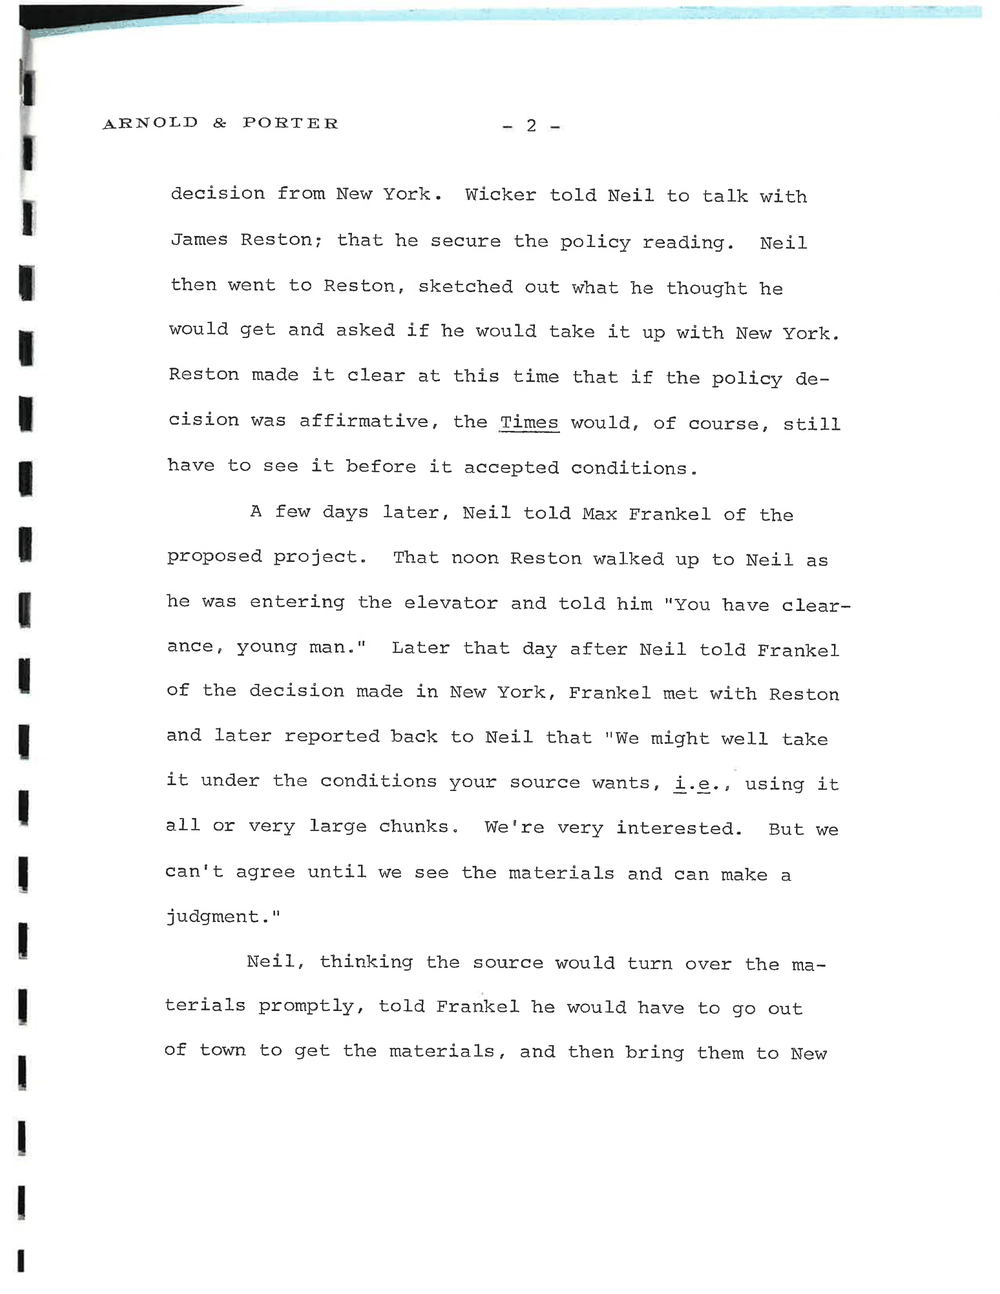 Page 2 from Rogovin Sheehan memo